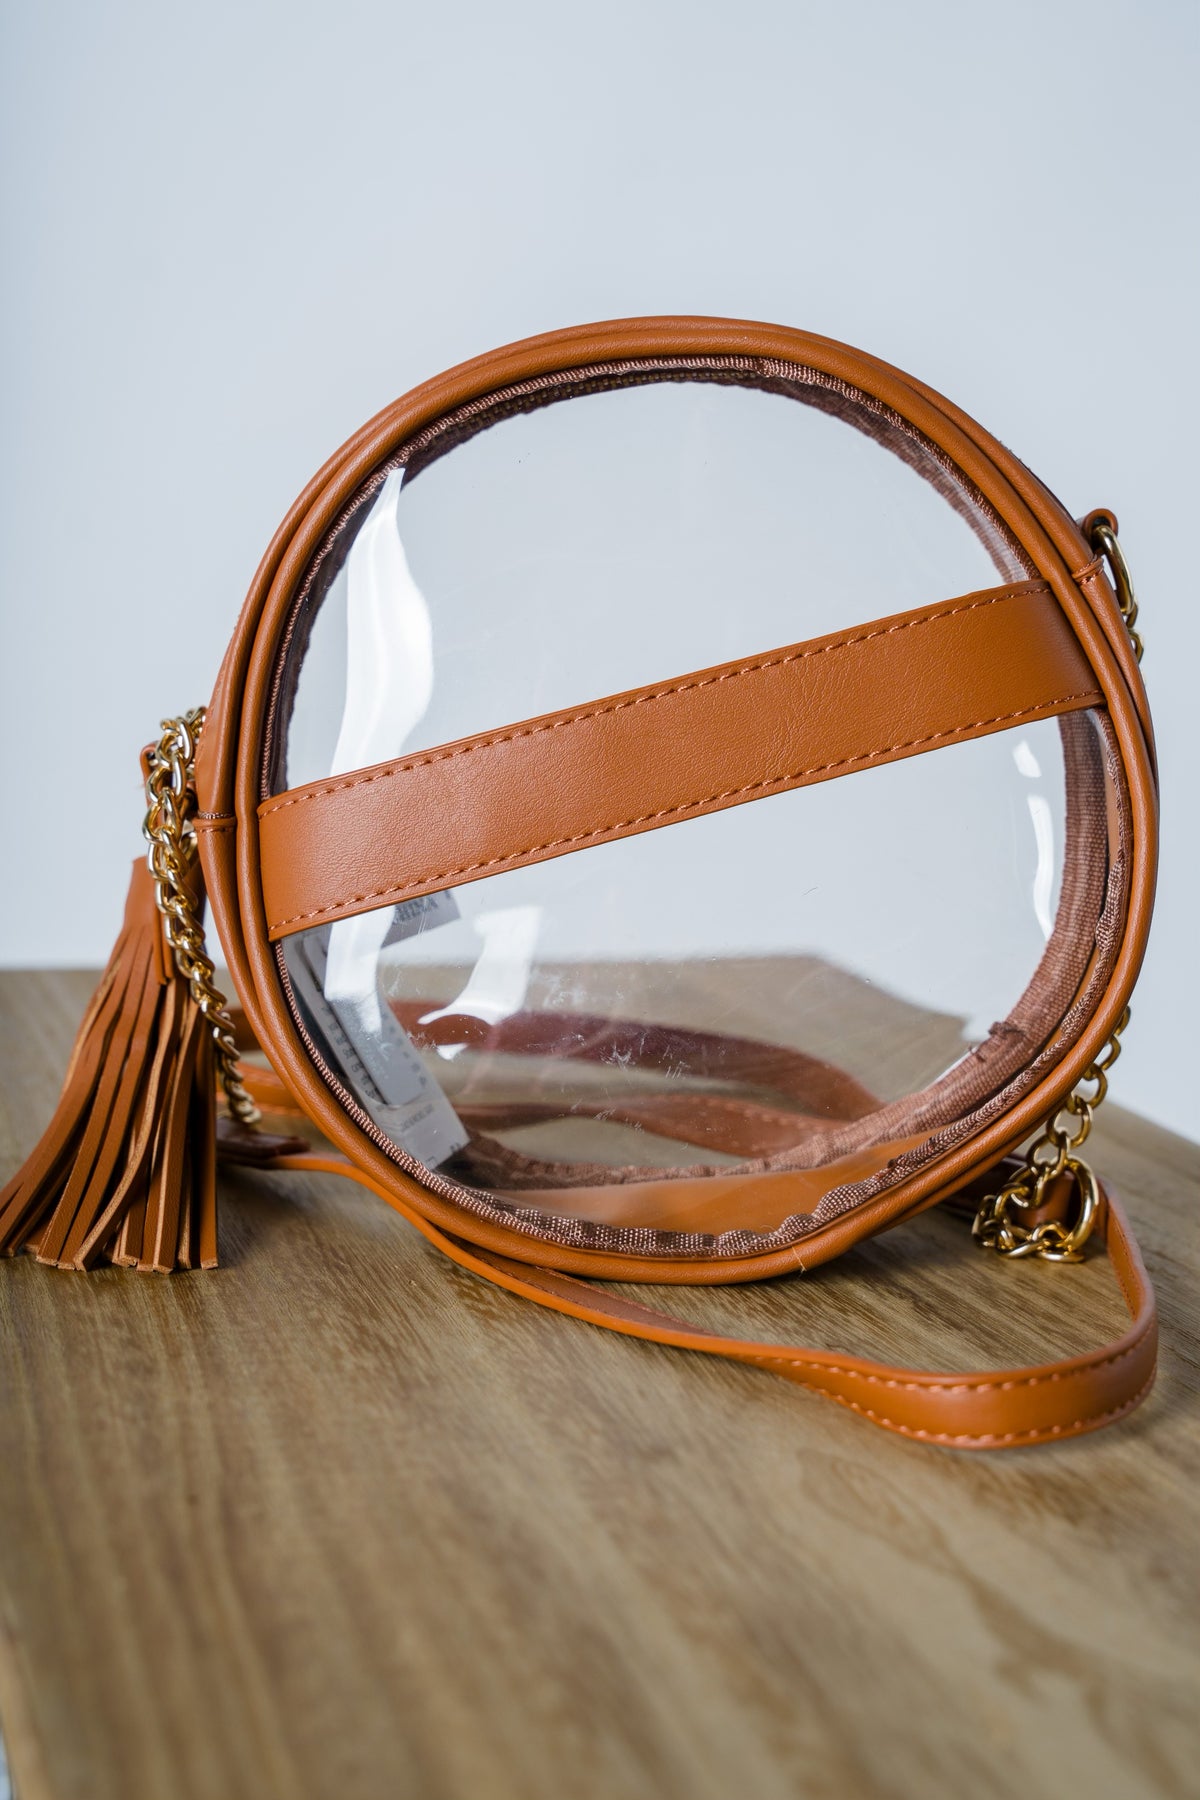 Round clear bag brown - Trendy Bags at Lush Fashion Lounge Boutique in Oklahoma City